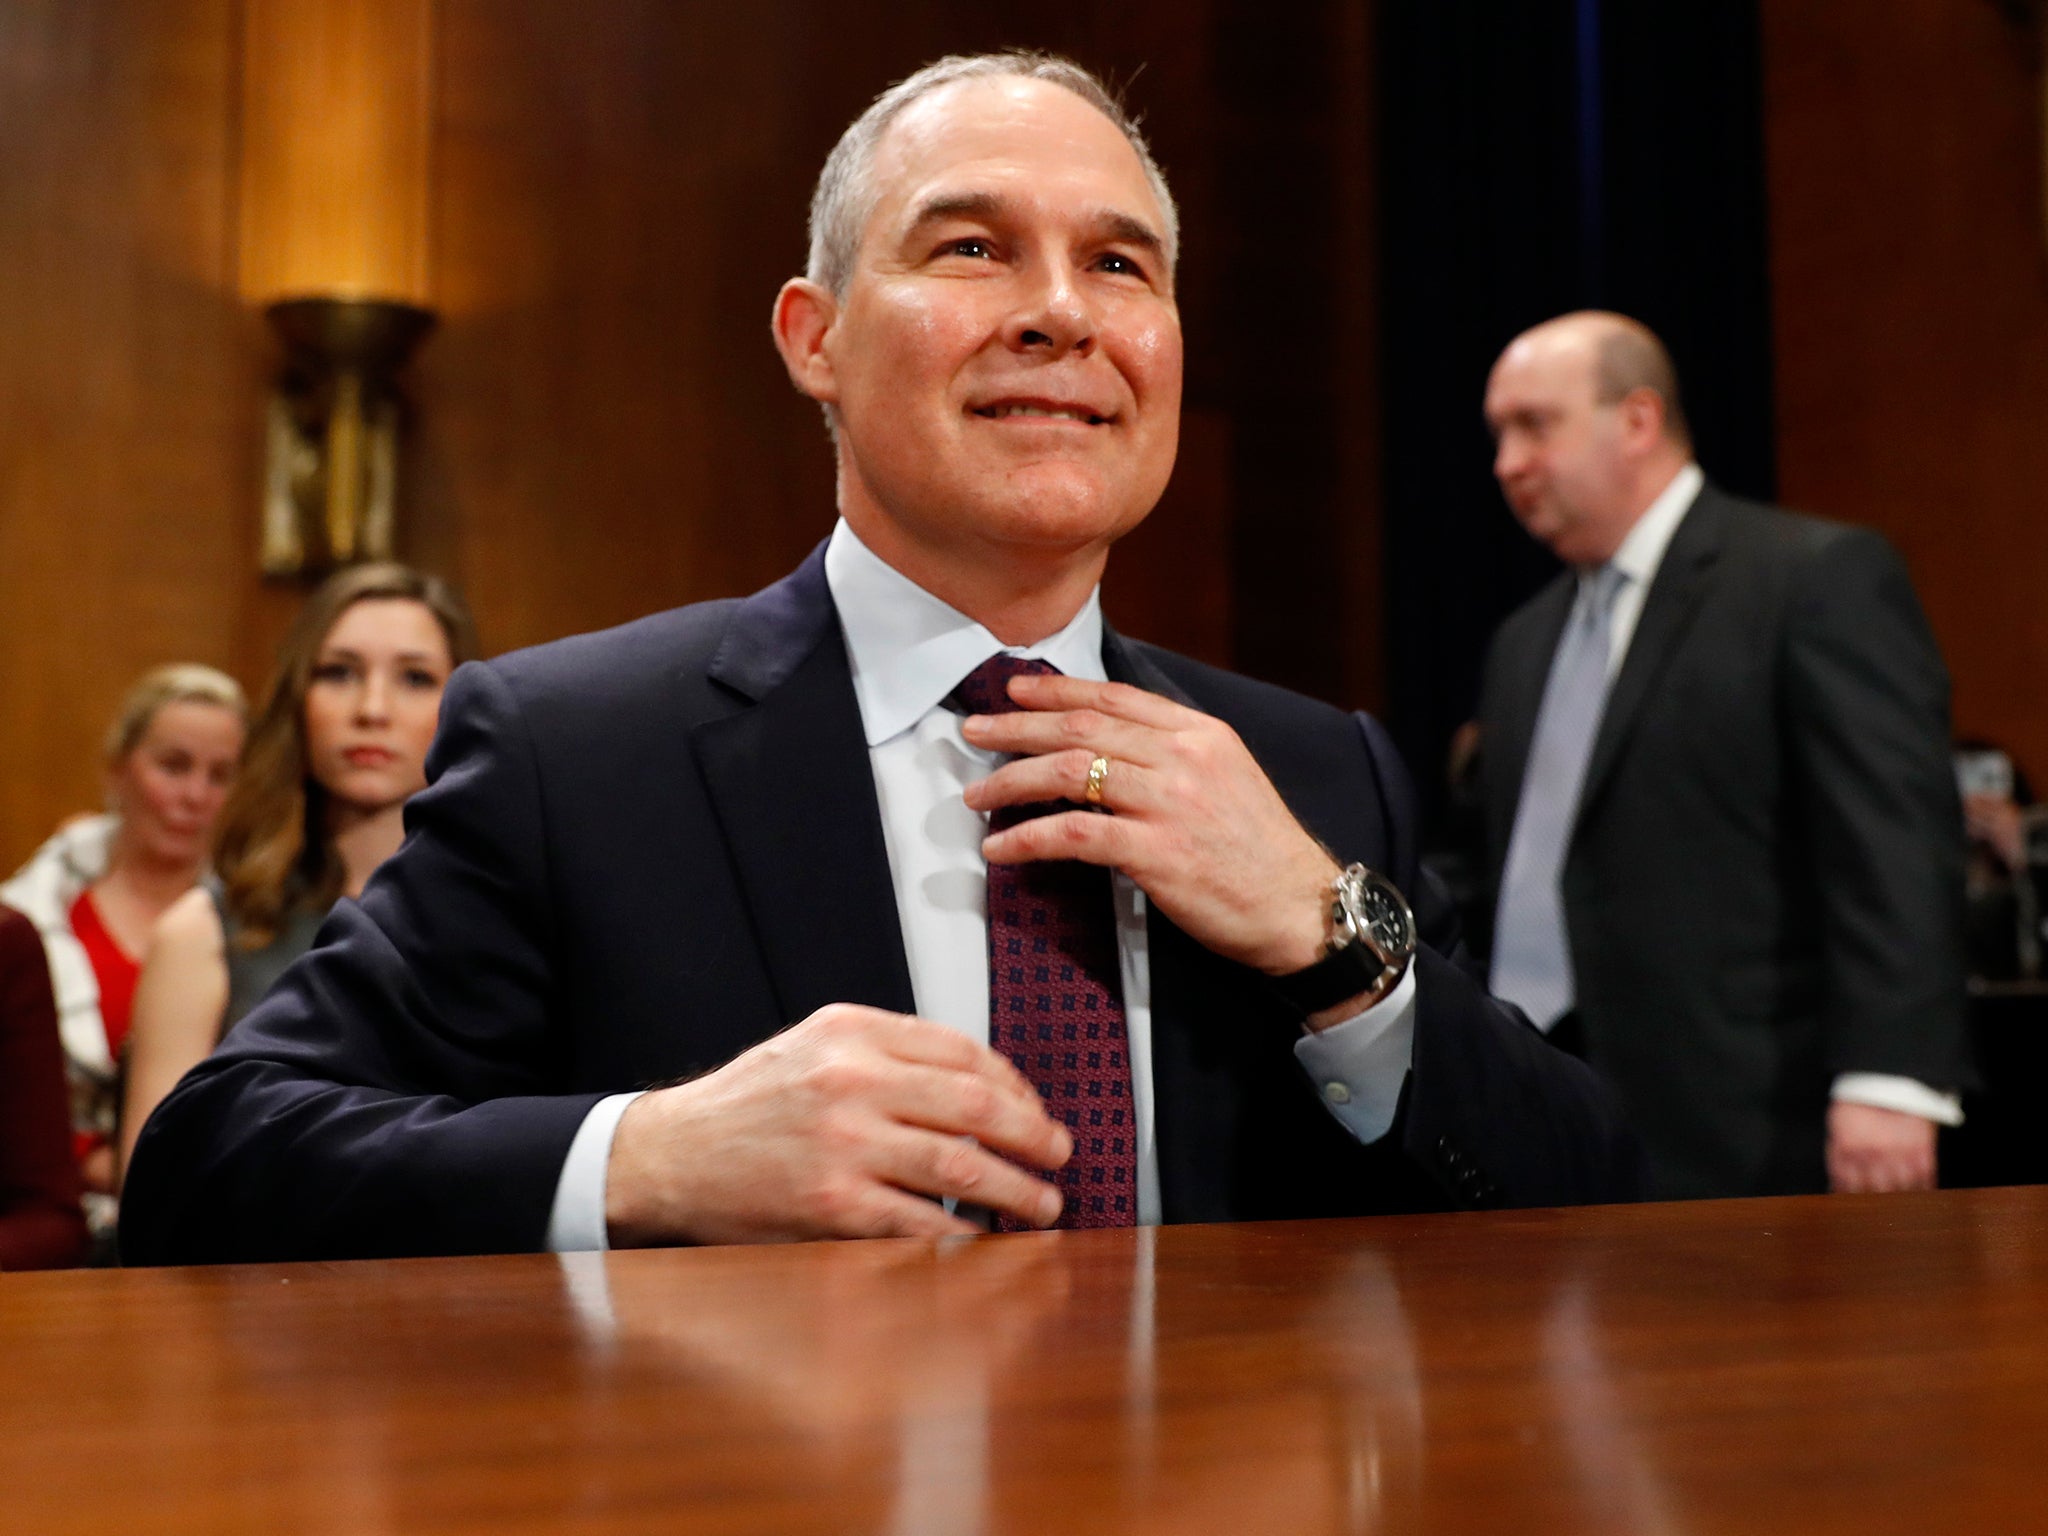 Scott Pruitt may have gone further than he meant in denying accepted science